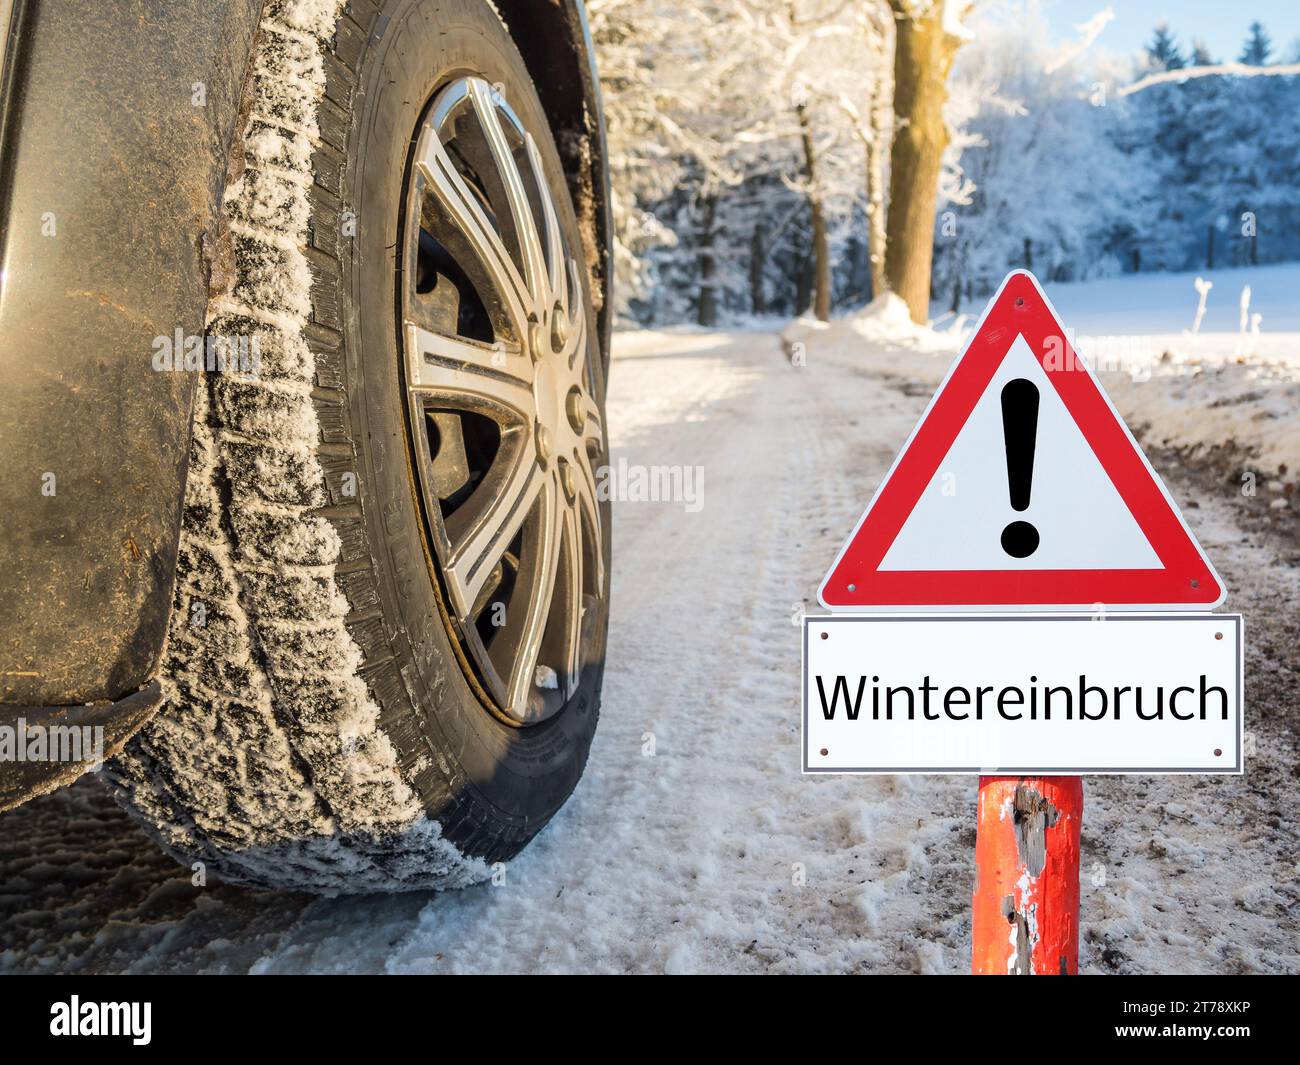 Warning sign for onset of winter in German Stock Photo